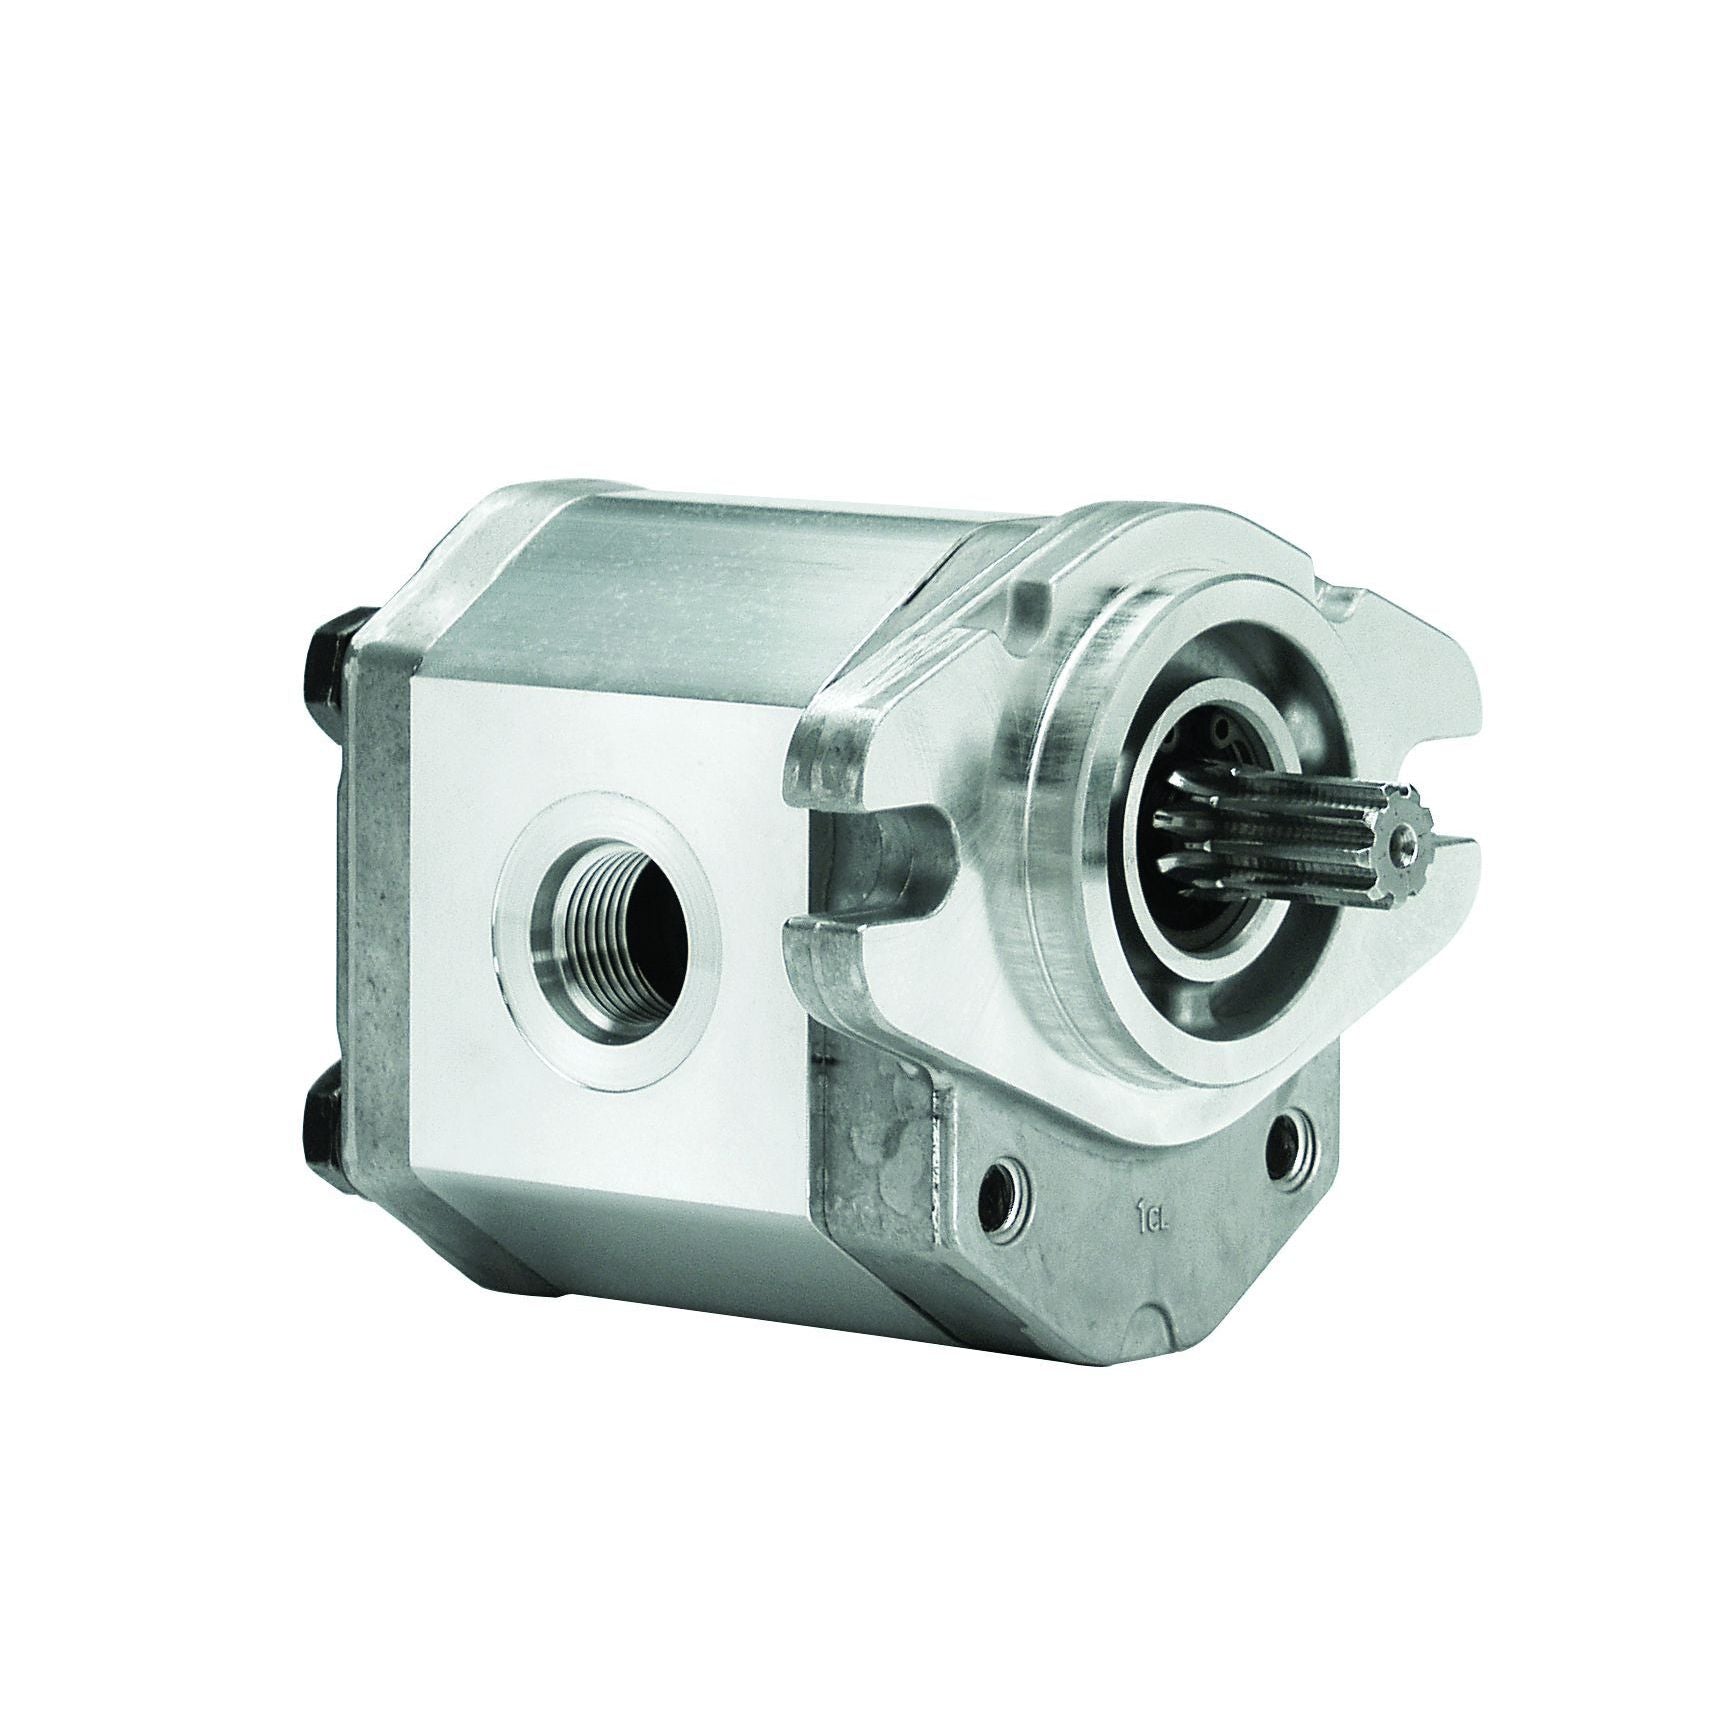 ALP3A-S-80-S1-FA : Marzocchi Gear Pump, CCW, 52cc (3.172in3), 24.72 GPM, 2900psi, 2500 RPM, #20 SAE (1.25") In, #12 SAE (3/4") Out, Splined Shaft 13T 16/32DP, SAE B 2-Bolt Mount